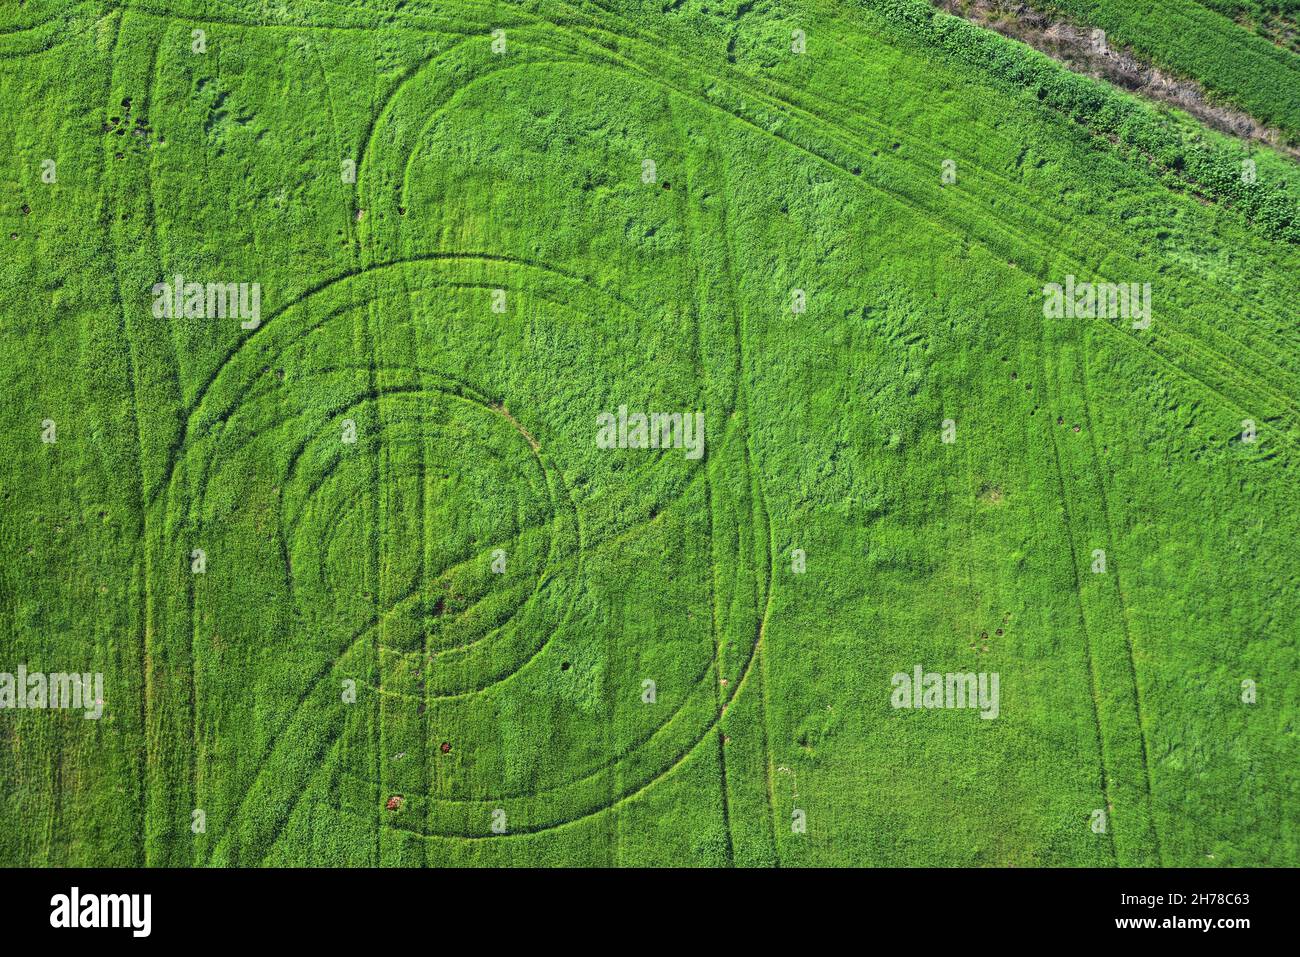 Elevated aerial photography of Crop circles Photographed in Israel, Coastal Plains Stock Photo